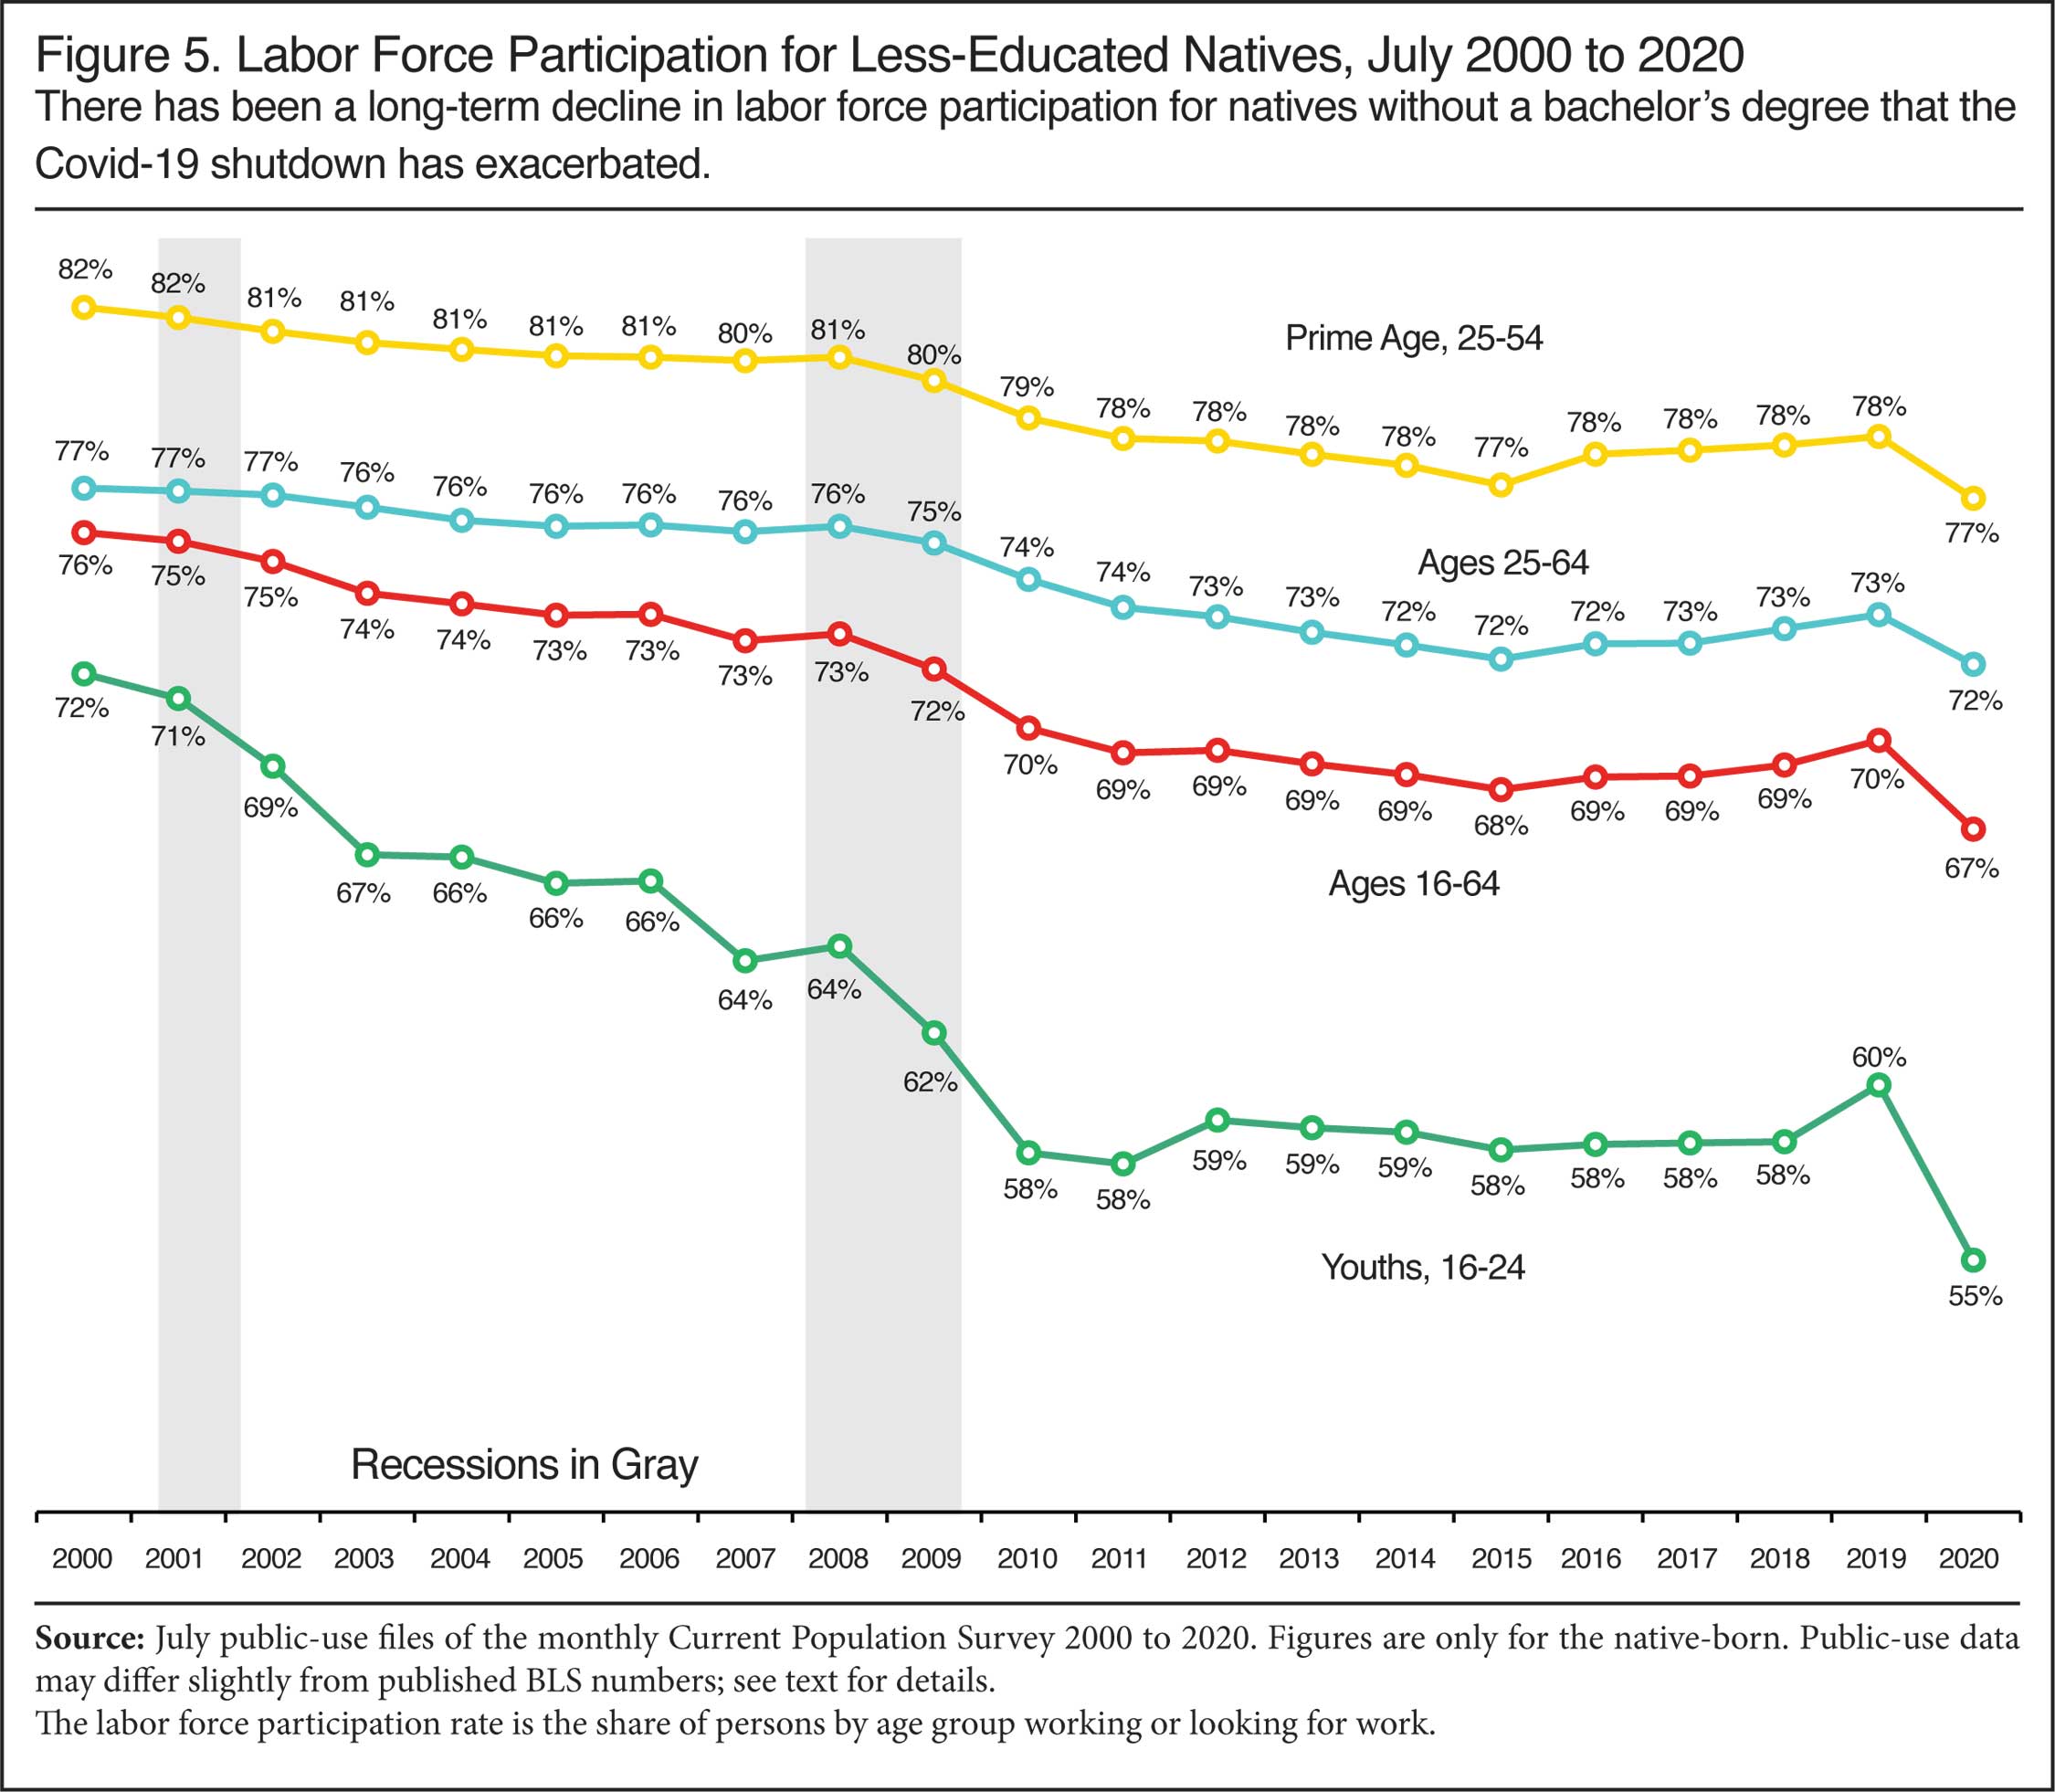 Graph: Labor Force Participation for Less-Educated Natives, June 2000 to 2020. There has been a long-term decline in labor force participation for natives without a bachelor’s degree that the Covid-19 shutdown has exacerbated. 